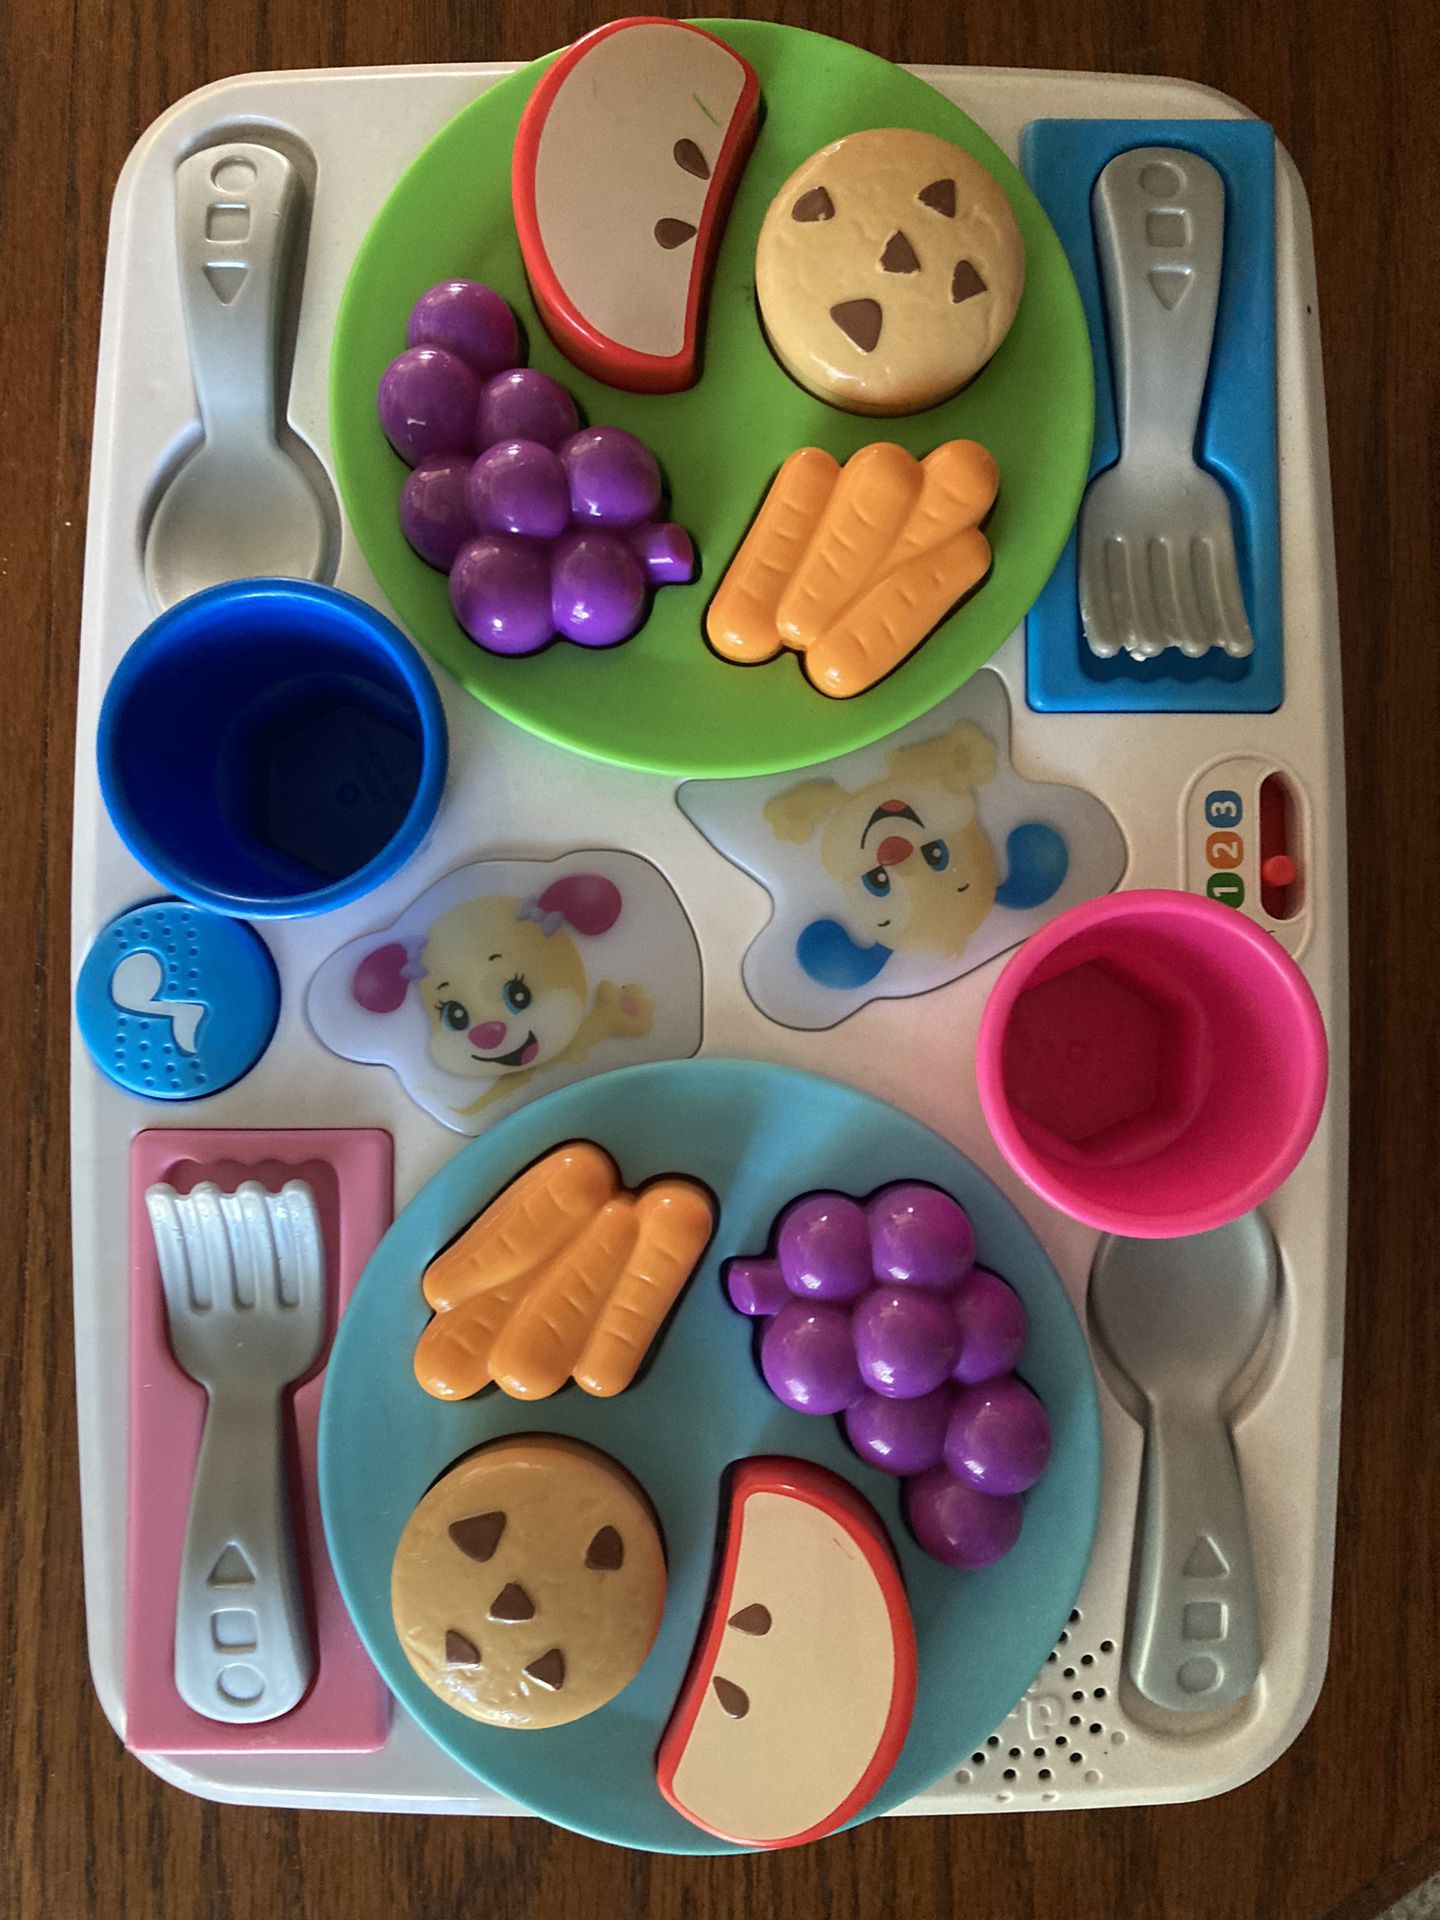 Interactive Table Setting Play set